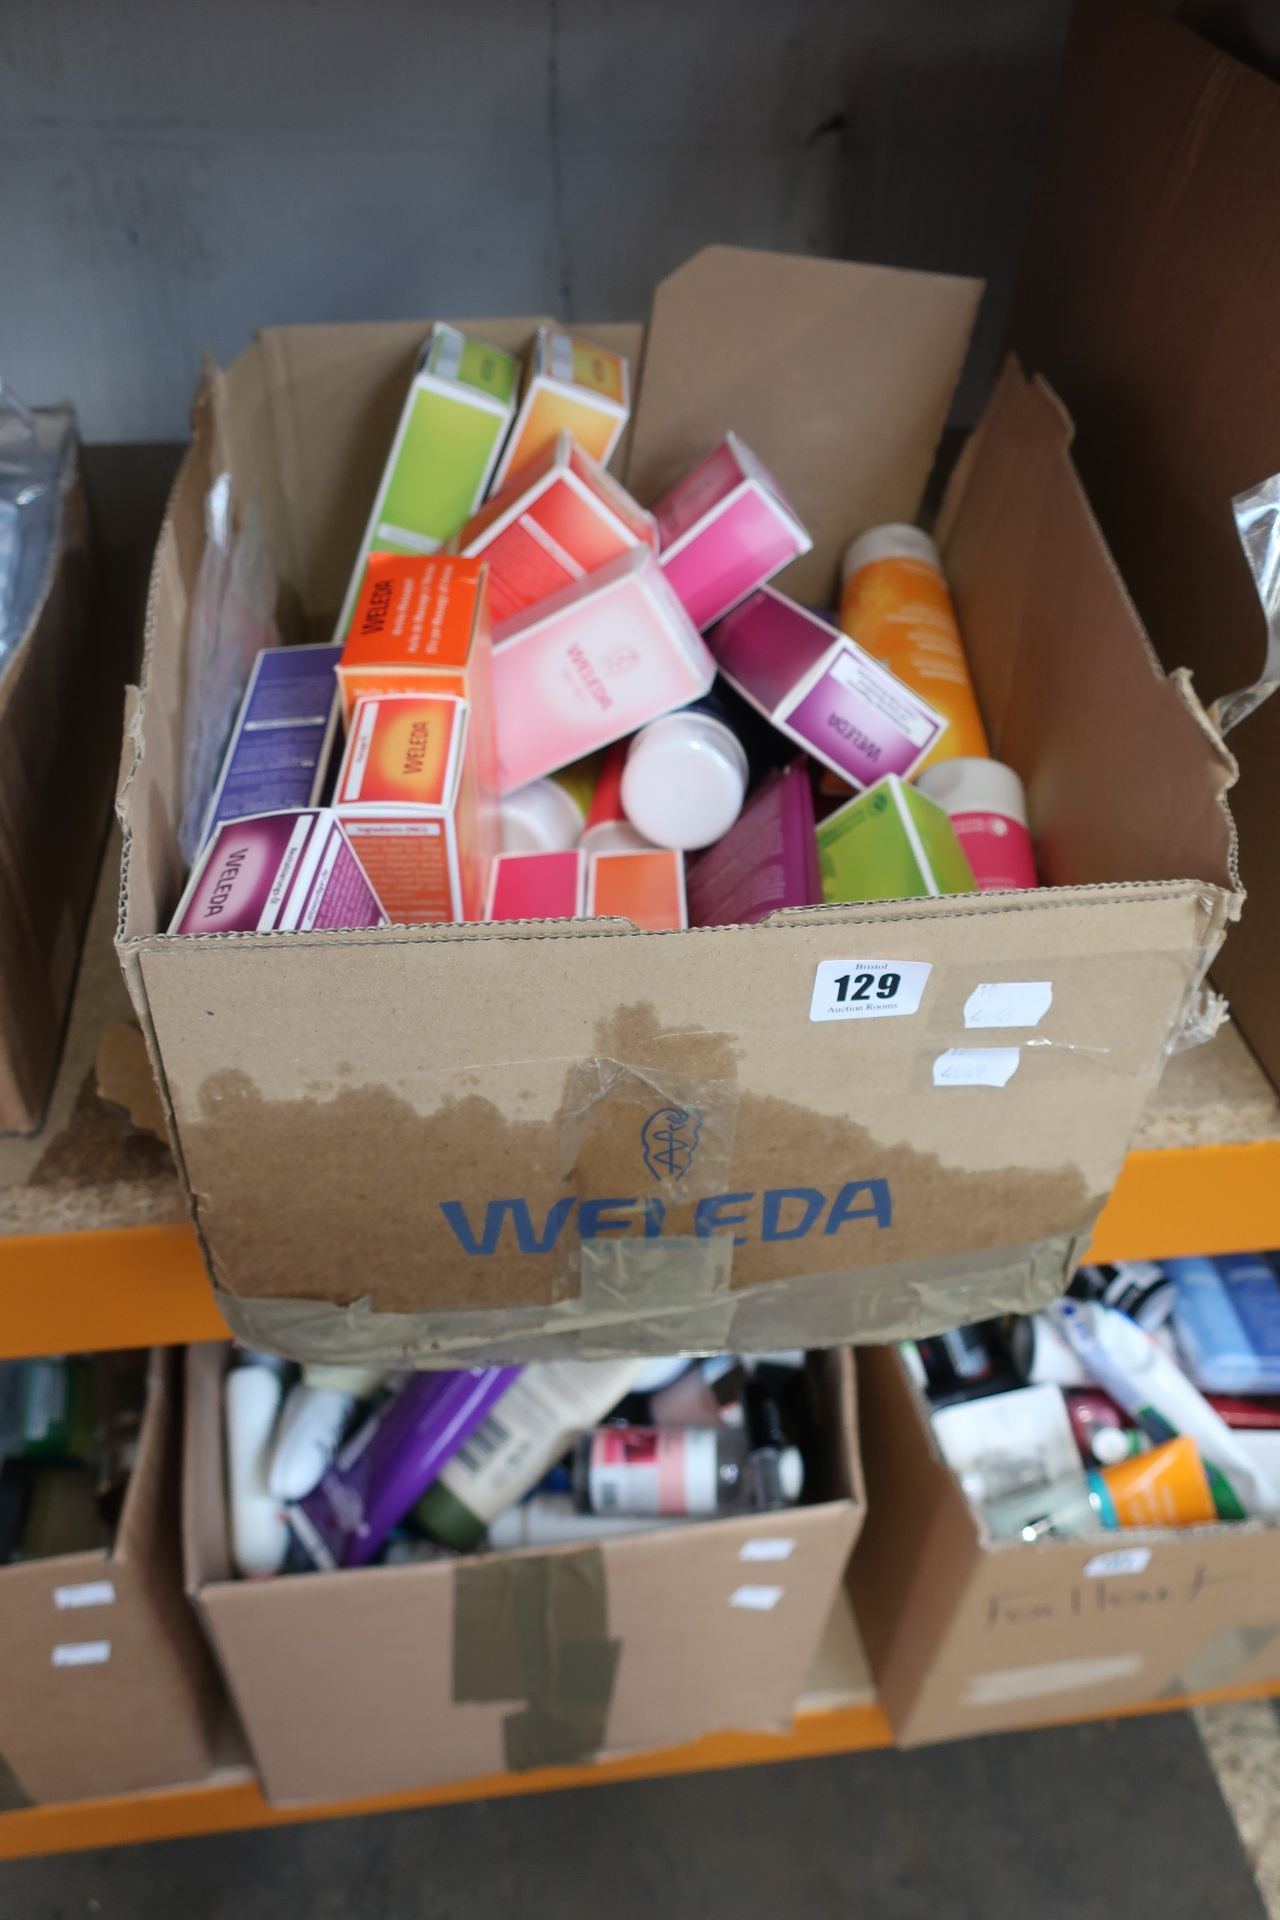 A quantity of Weleda products to include cremes, gels and body lotions.